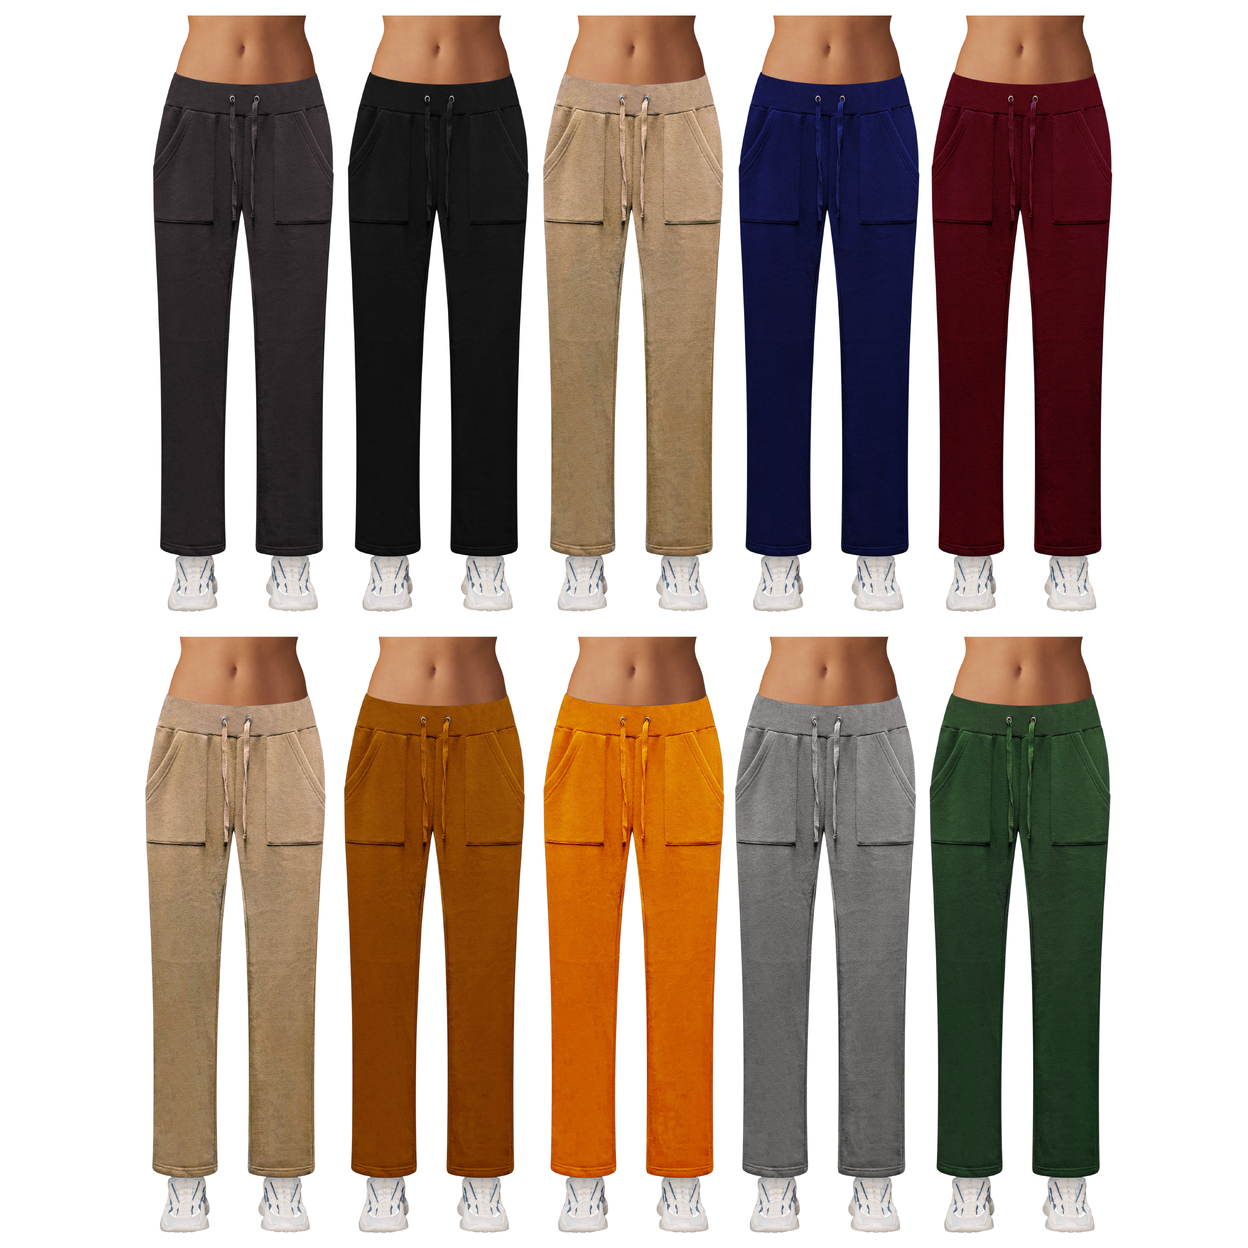 2-Pack: Women's Ultra-Soft Cozy Fleece Lined Elastic Waistband Terry Knit Pants - Assorted, Small